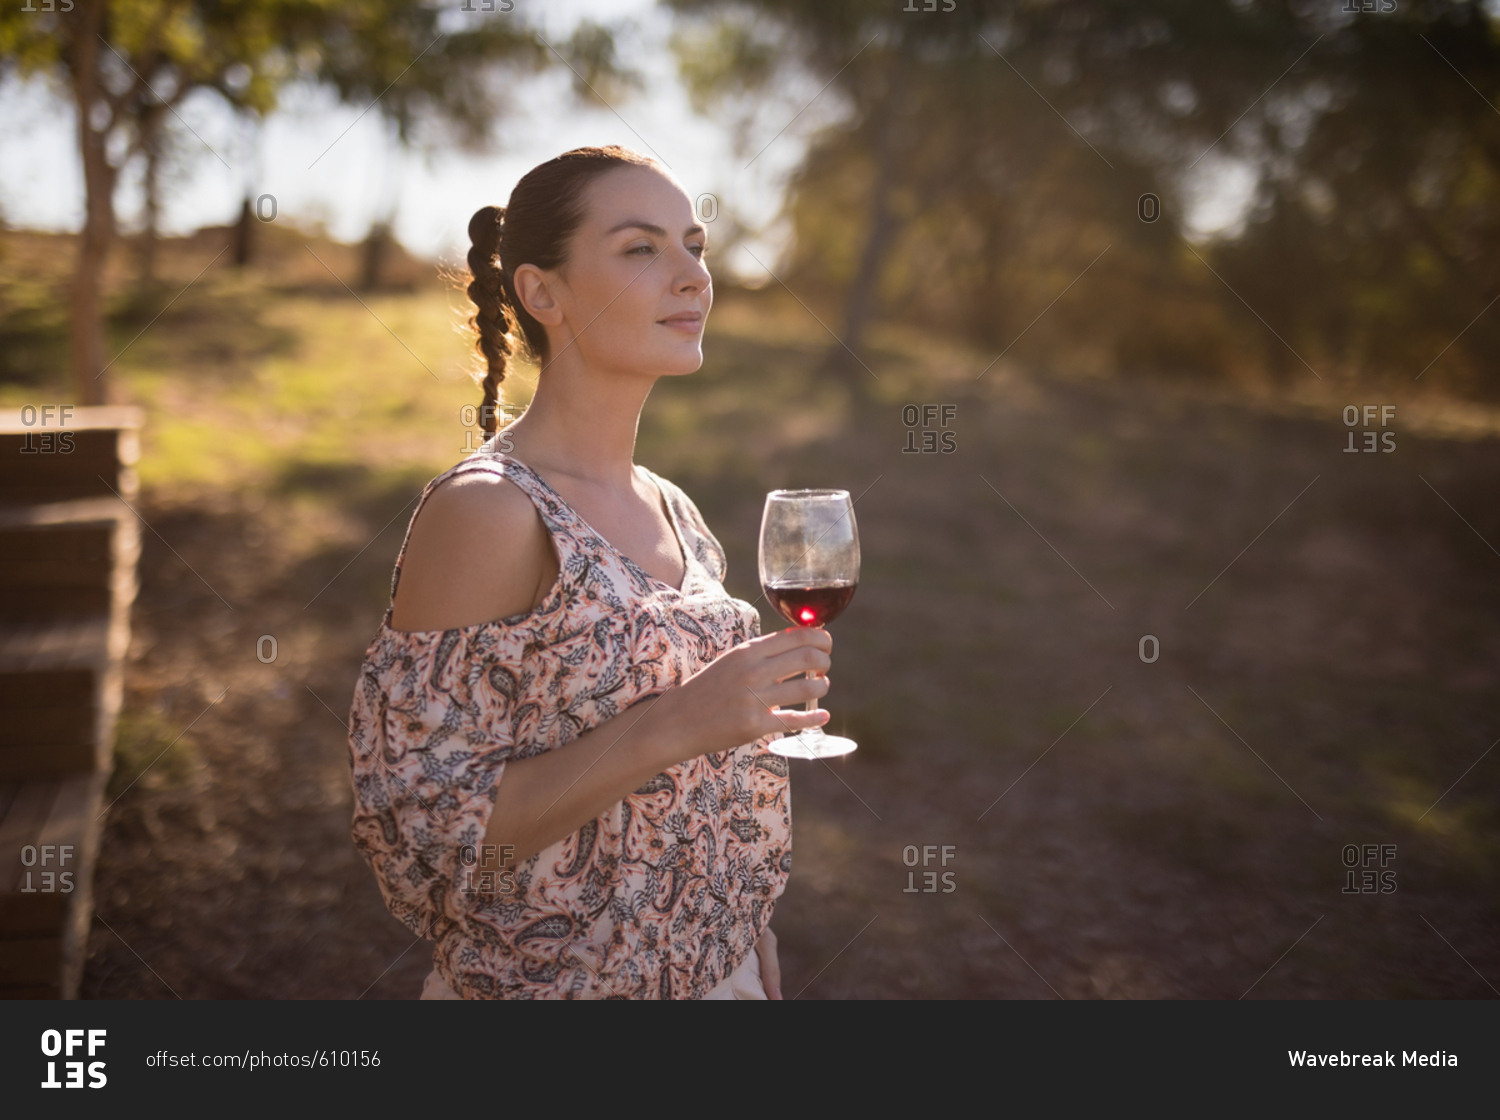 Thoughtful woman having a glass of wine during safari vacation